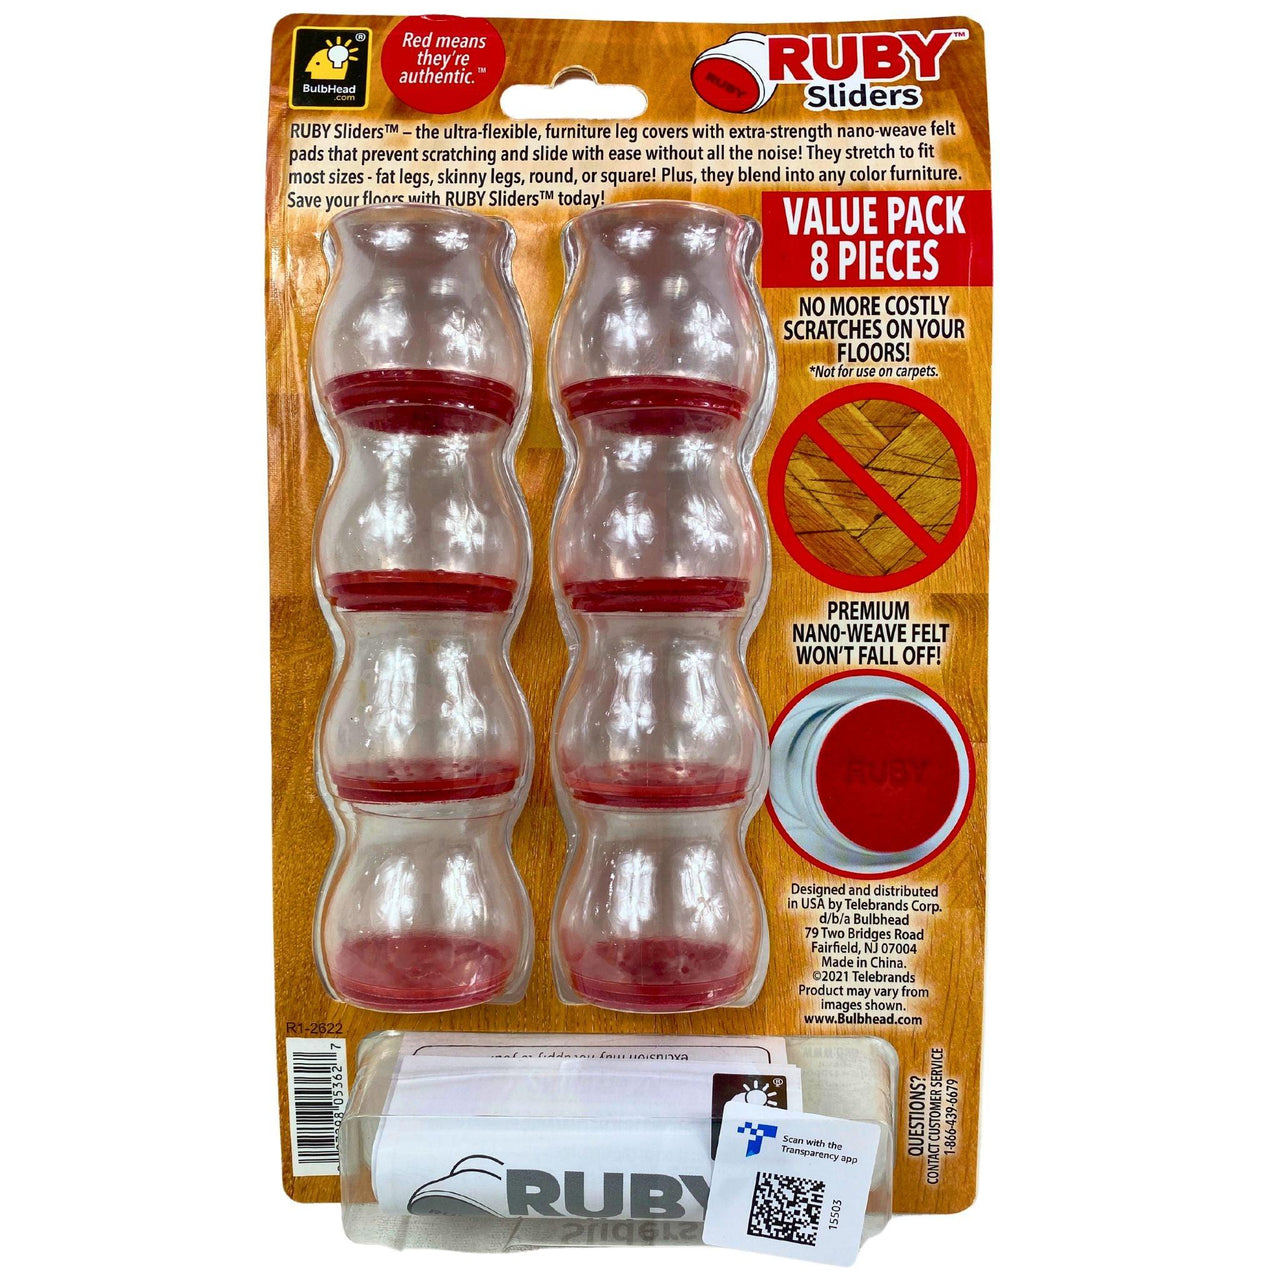 Ruby Sliders Flexible Chair Sliders That Protect Your Floors! (60 Pcs Lot) - Discount Wholesalers Inc